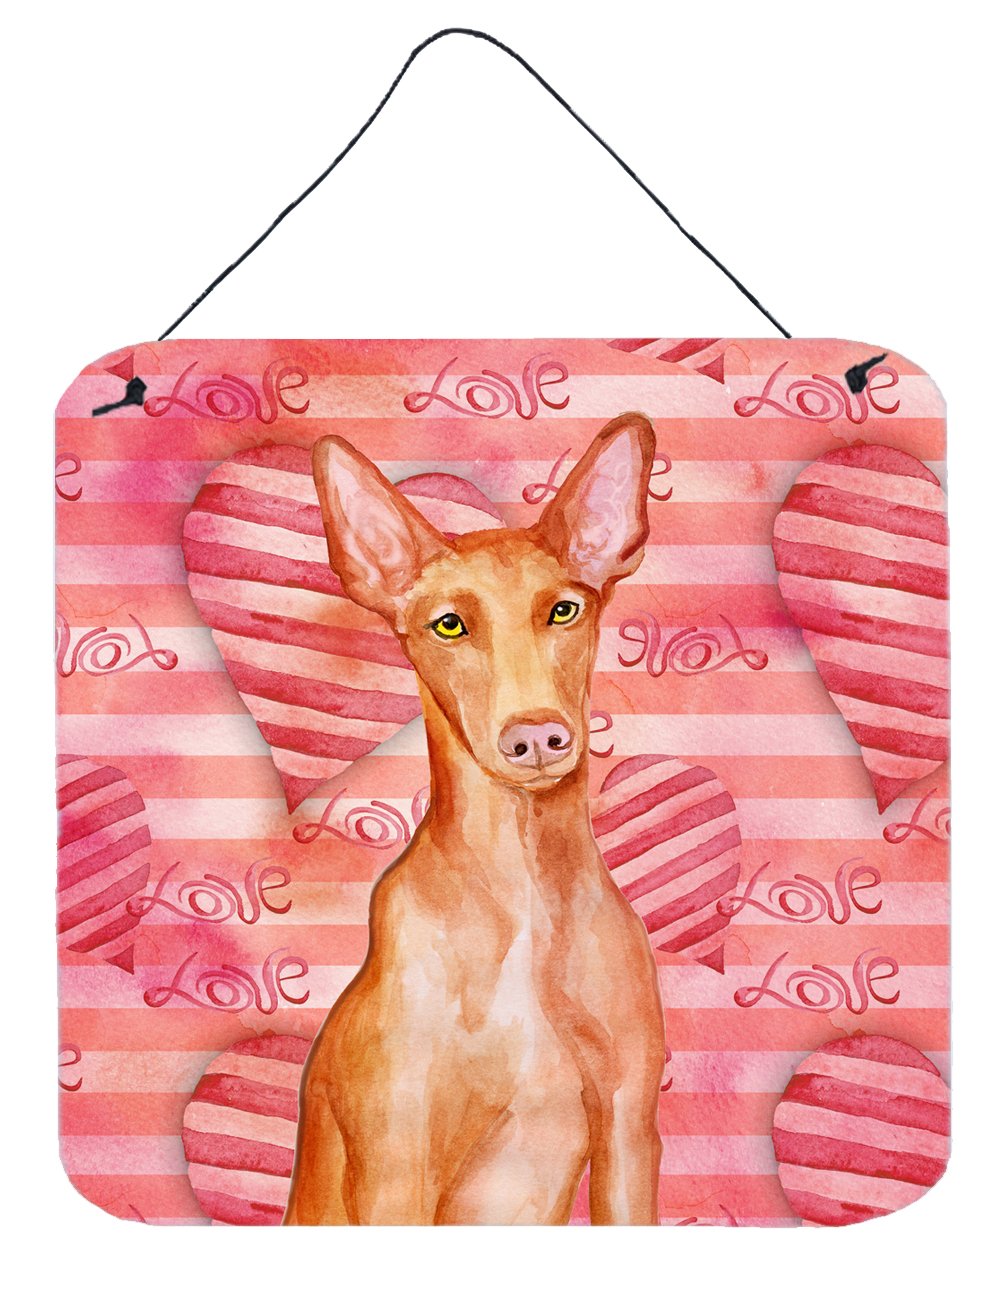 Pharaoh Hound Love Wall or Door Hanging Prints BB9802DS66 by Caroline's Treasures